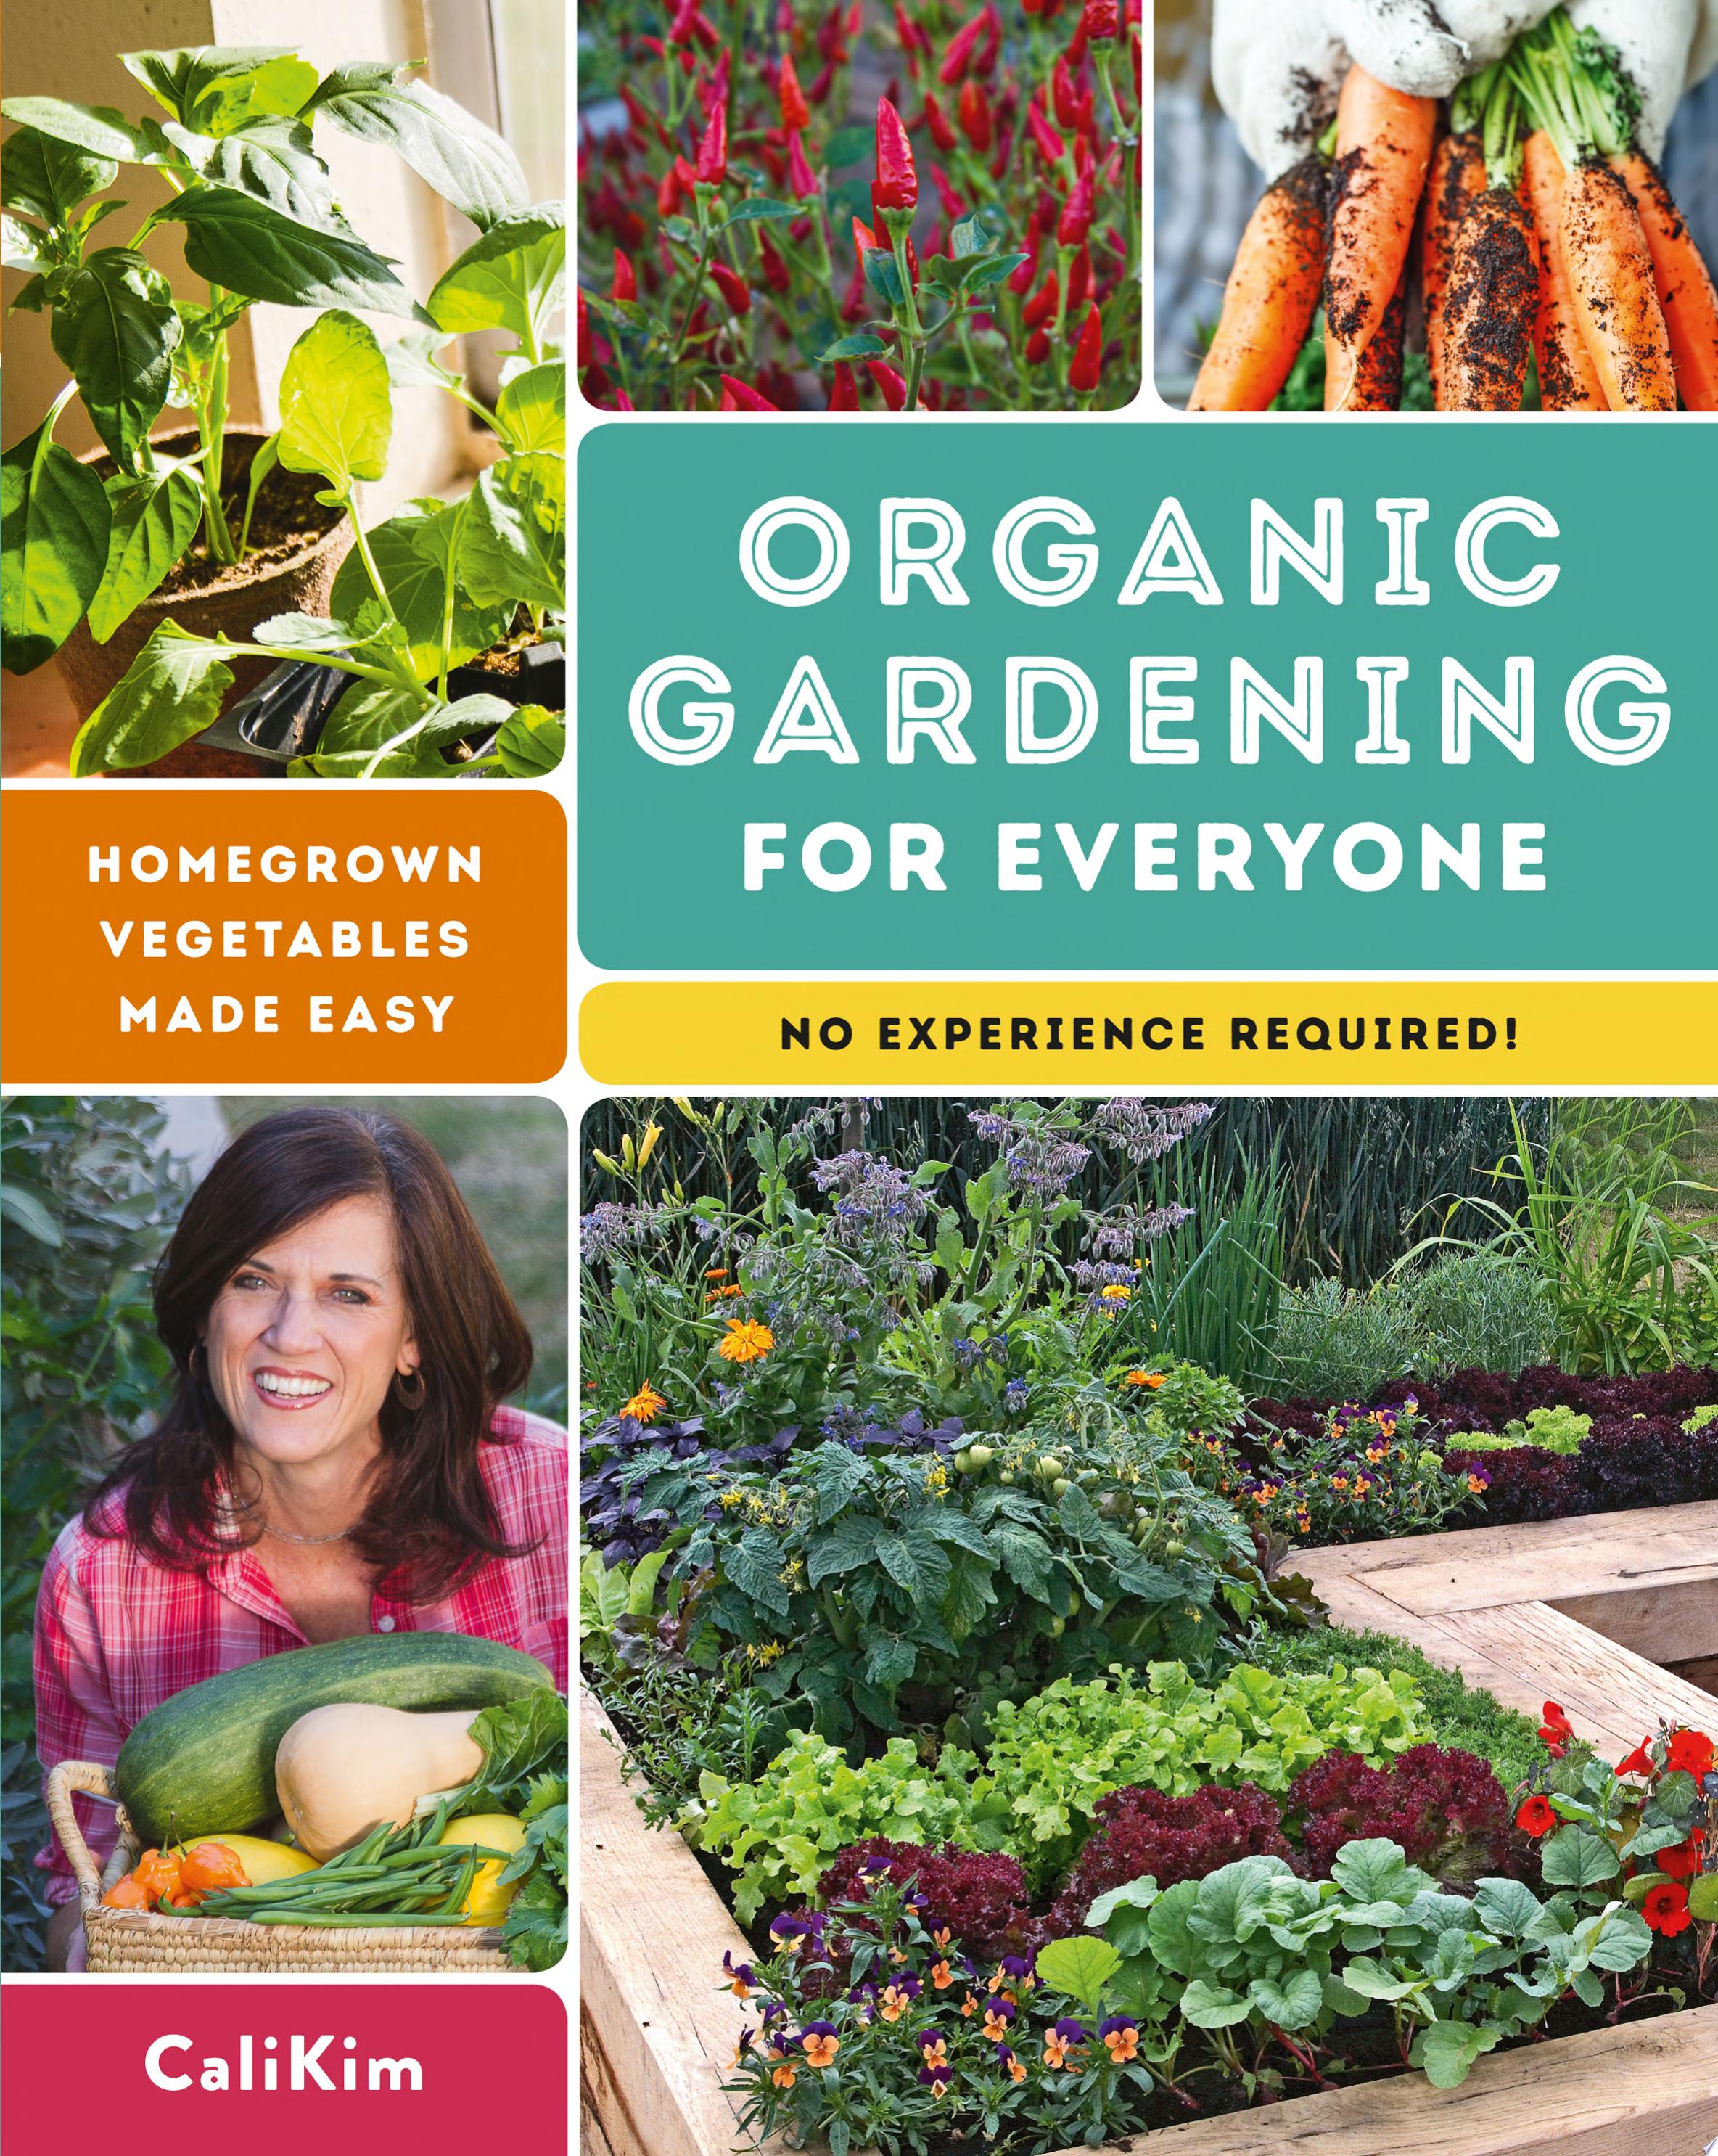 Image for "Organic Gardening for Everyone: homegrown vegetables made easy (no experience required)"